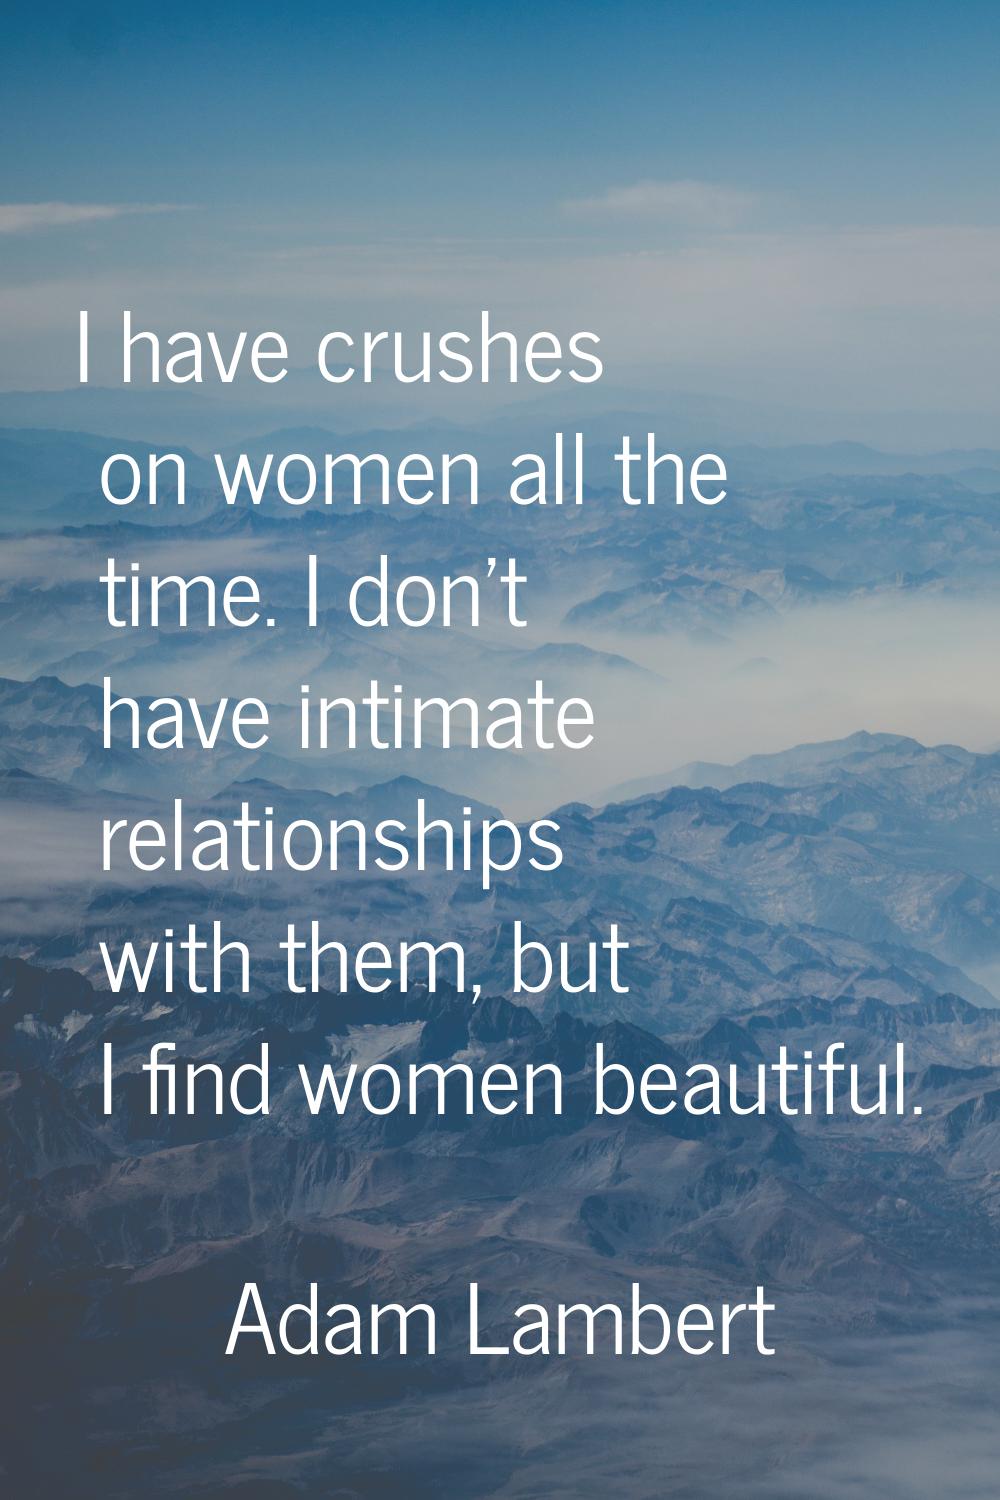 I have crushes on women all the time. I don't have intimate relationships with them, but I find wom